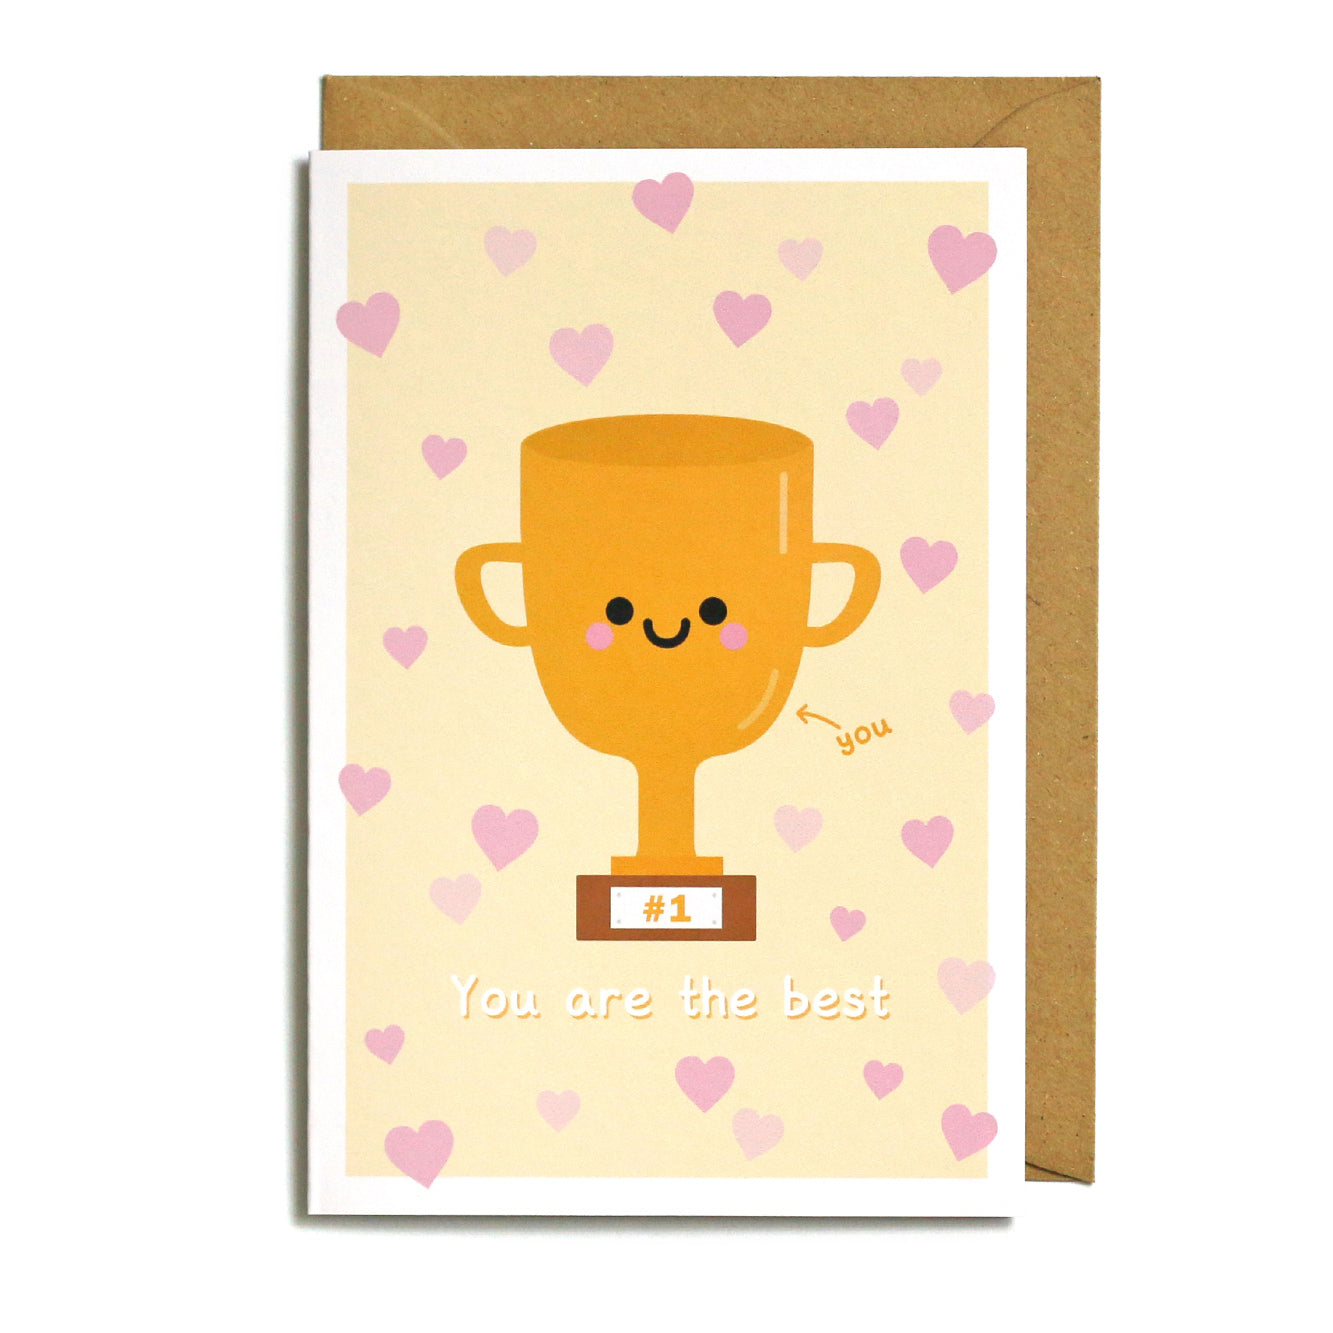 Cute trophy card with #1 on the plaque and 'You are the best' written underneath